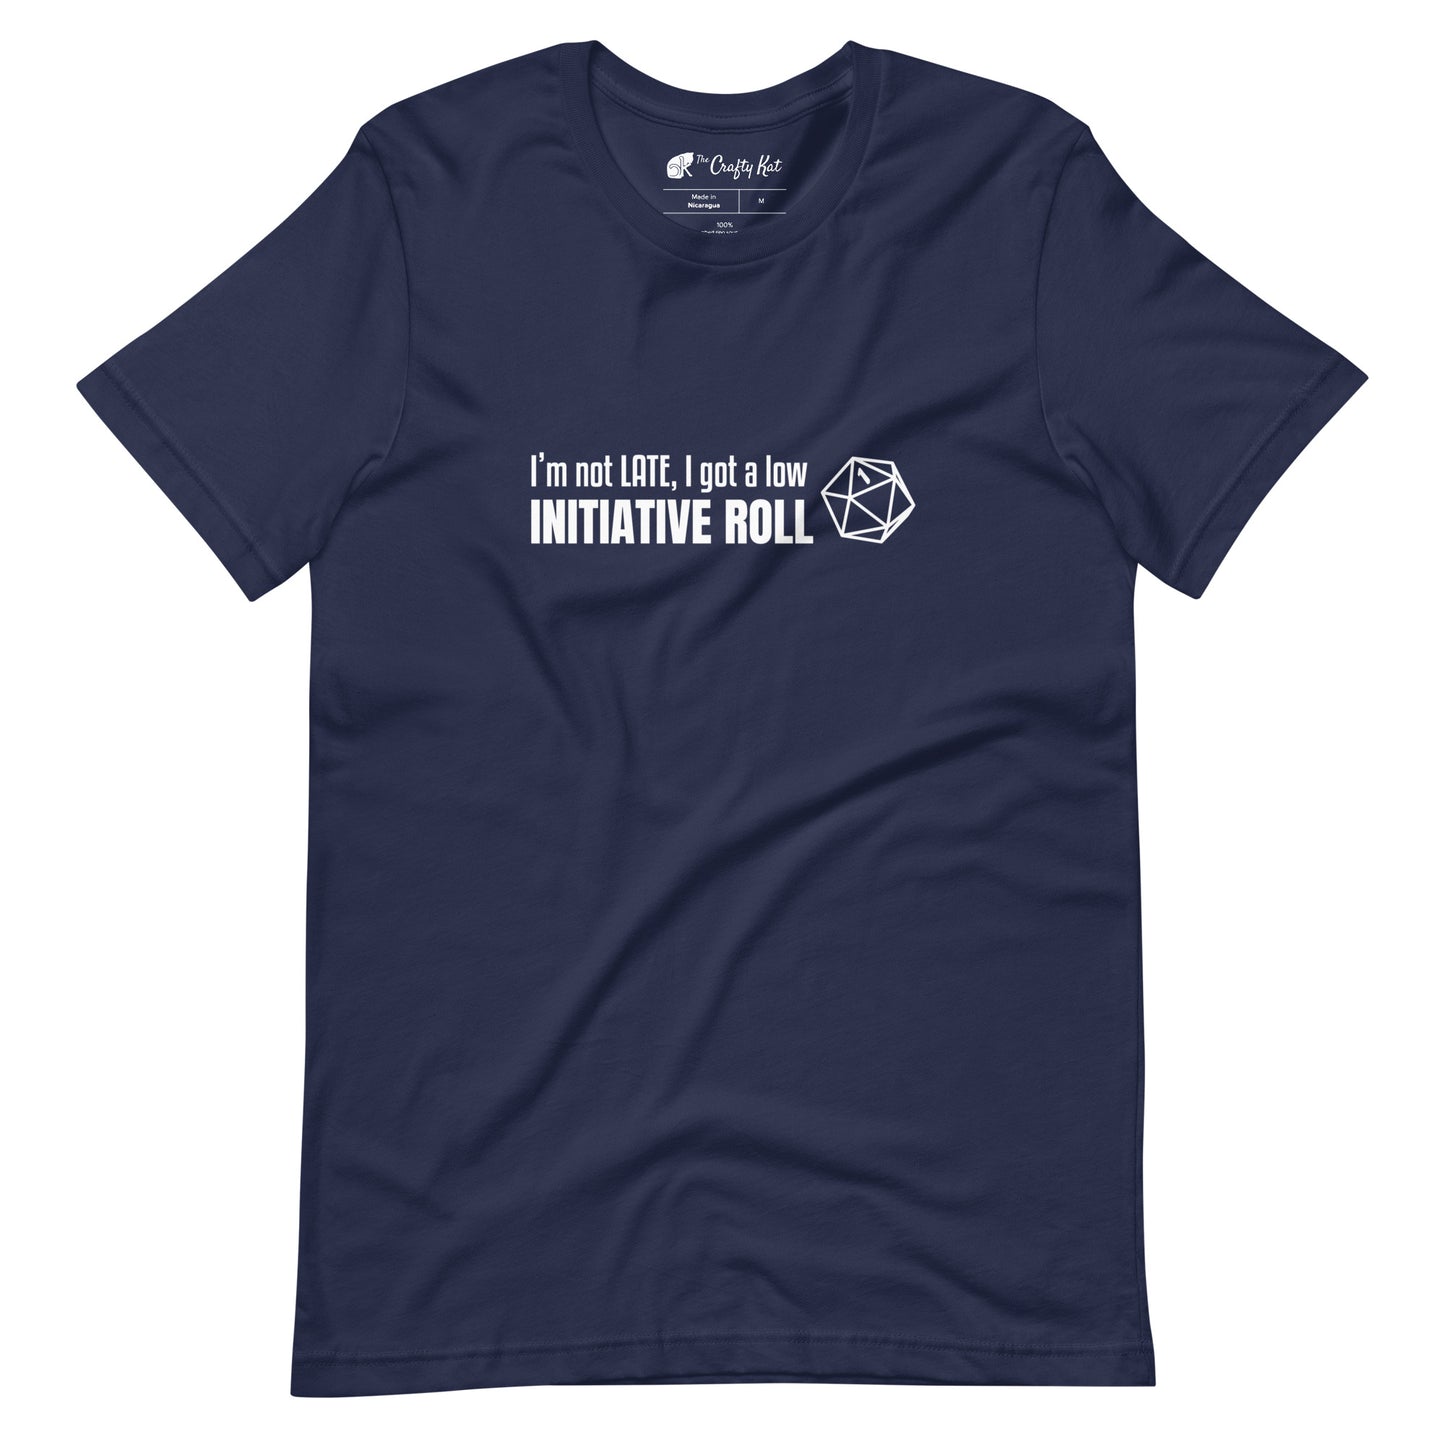 Navy unisex t-shirt with a graphic of a d20 (twenty-sided die) showing a roll of "1" and text: "I'm not LATE, I got a low INITIATIVE ROLL"